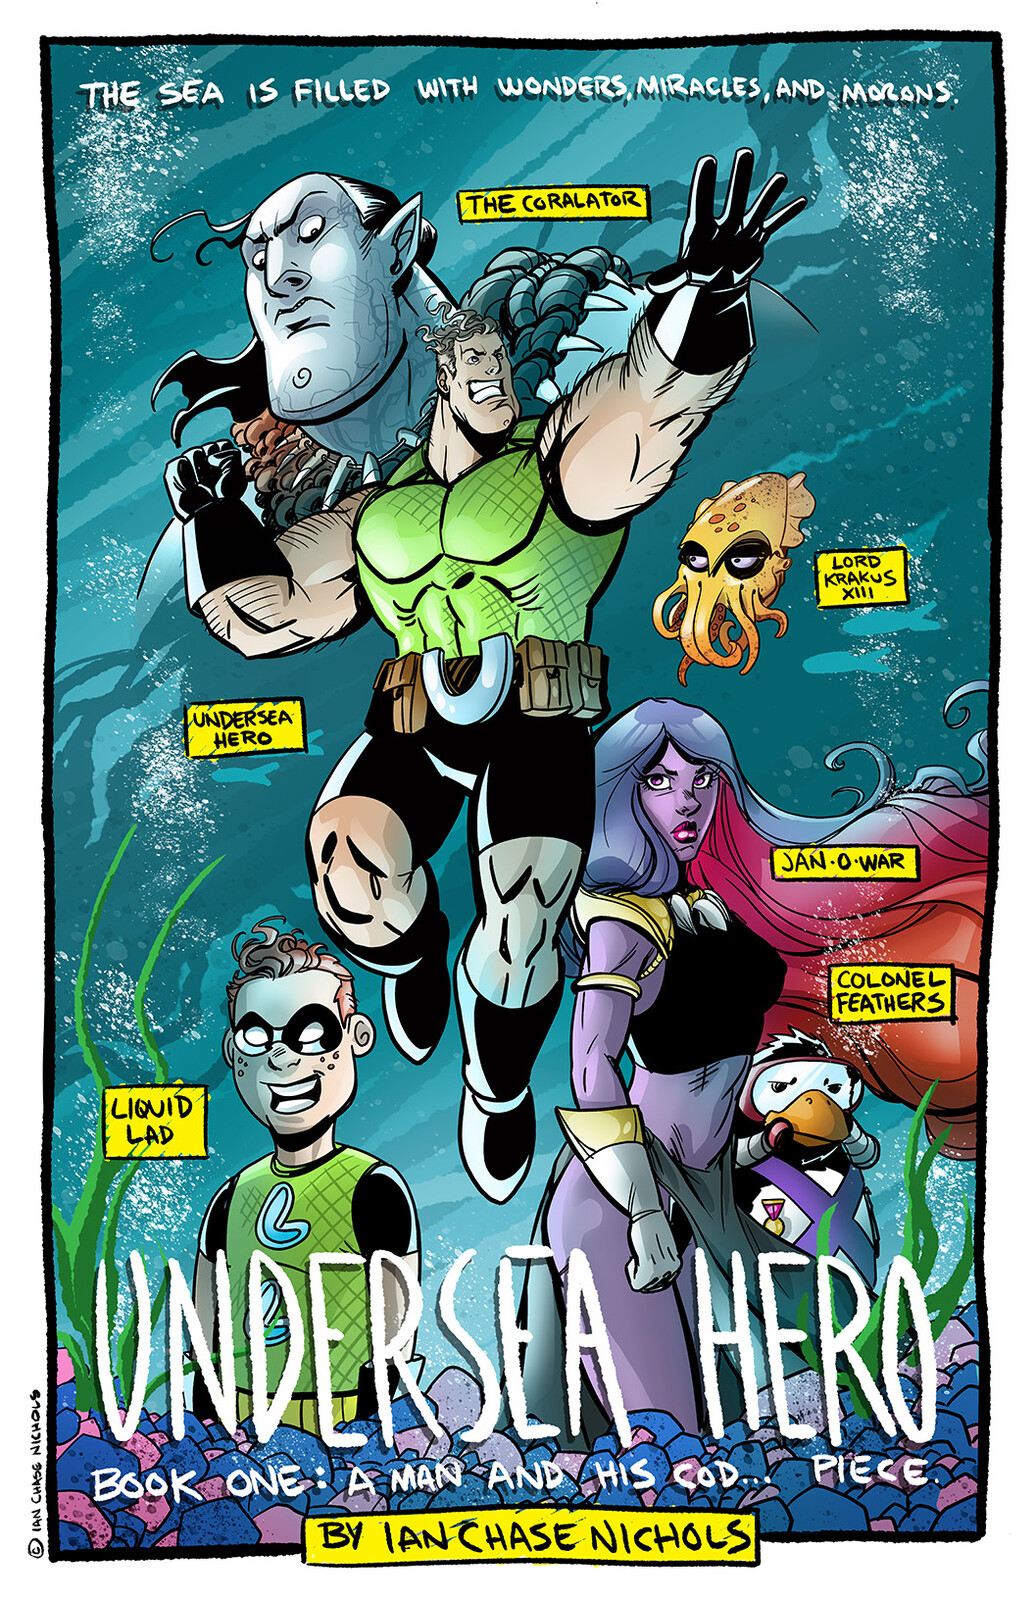 UNDERSEA HERO Promotional Art.

UNDERSEA HERO and all Related Characters are Copyright © and Trademark TM 2022 Ian Chase Nichols. All Rights Reserved.